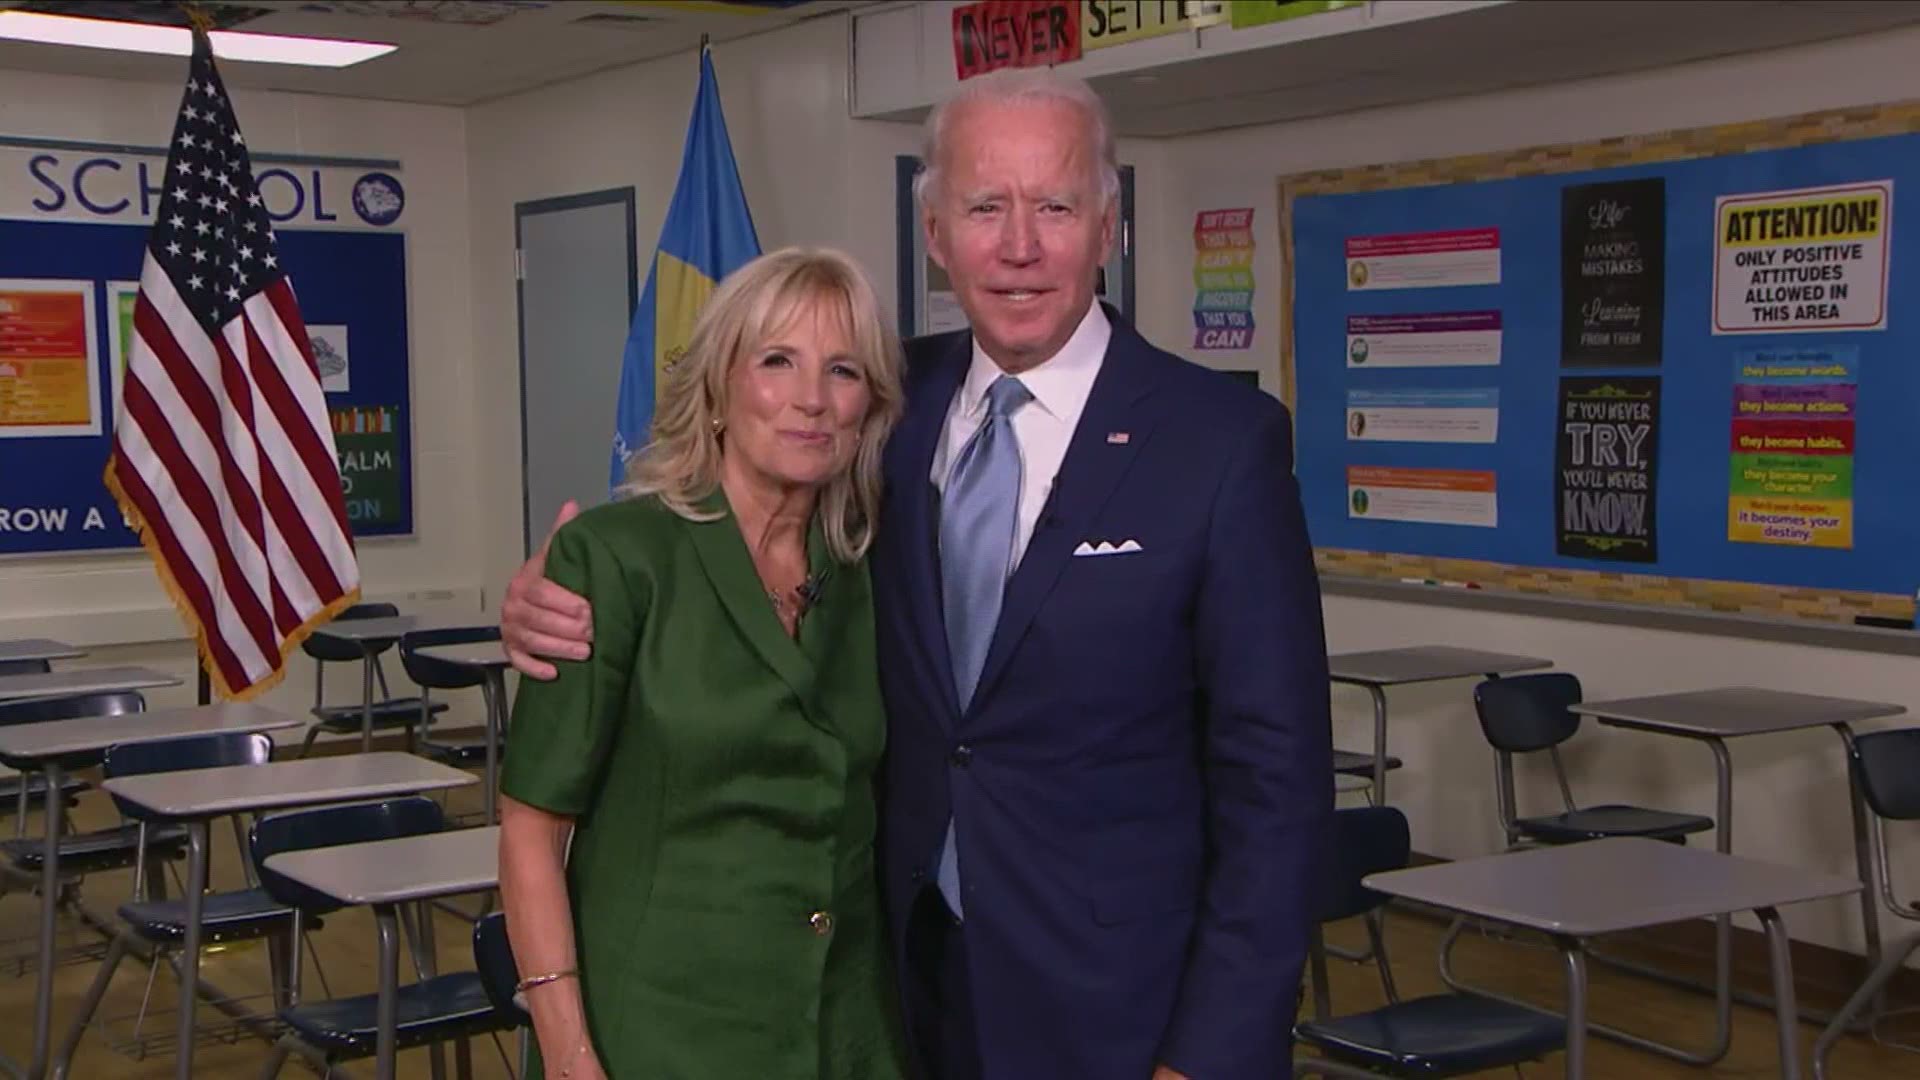 After former second lady Dr. Jill Biden's remarks at the Democratic National Convention, Joe Biden joined his wife and called her the rock of their family.